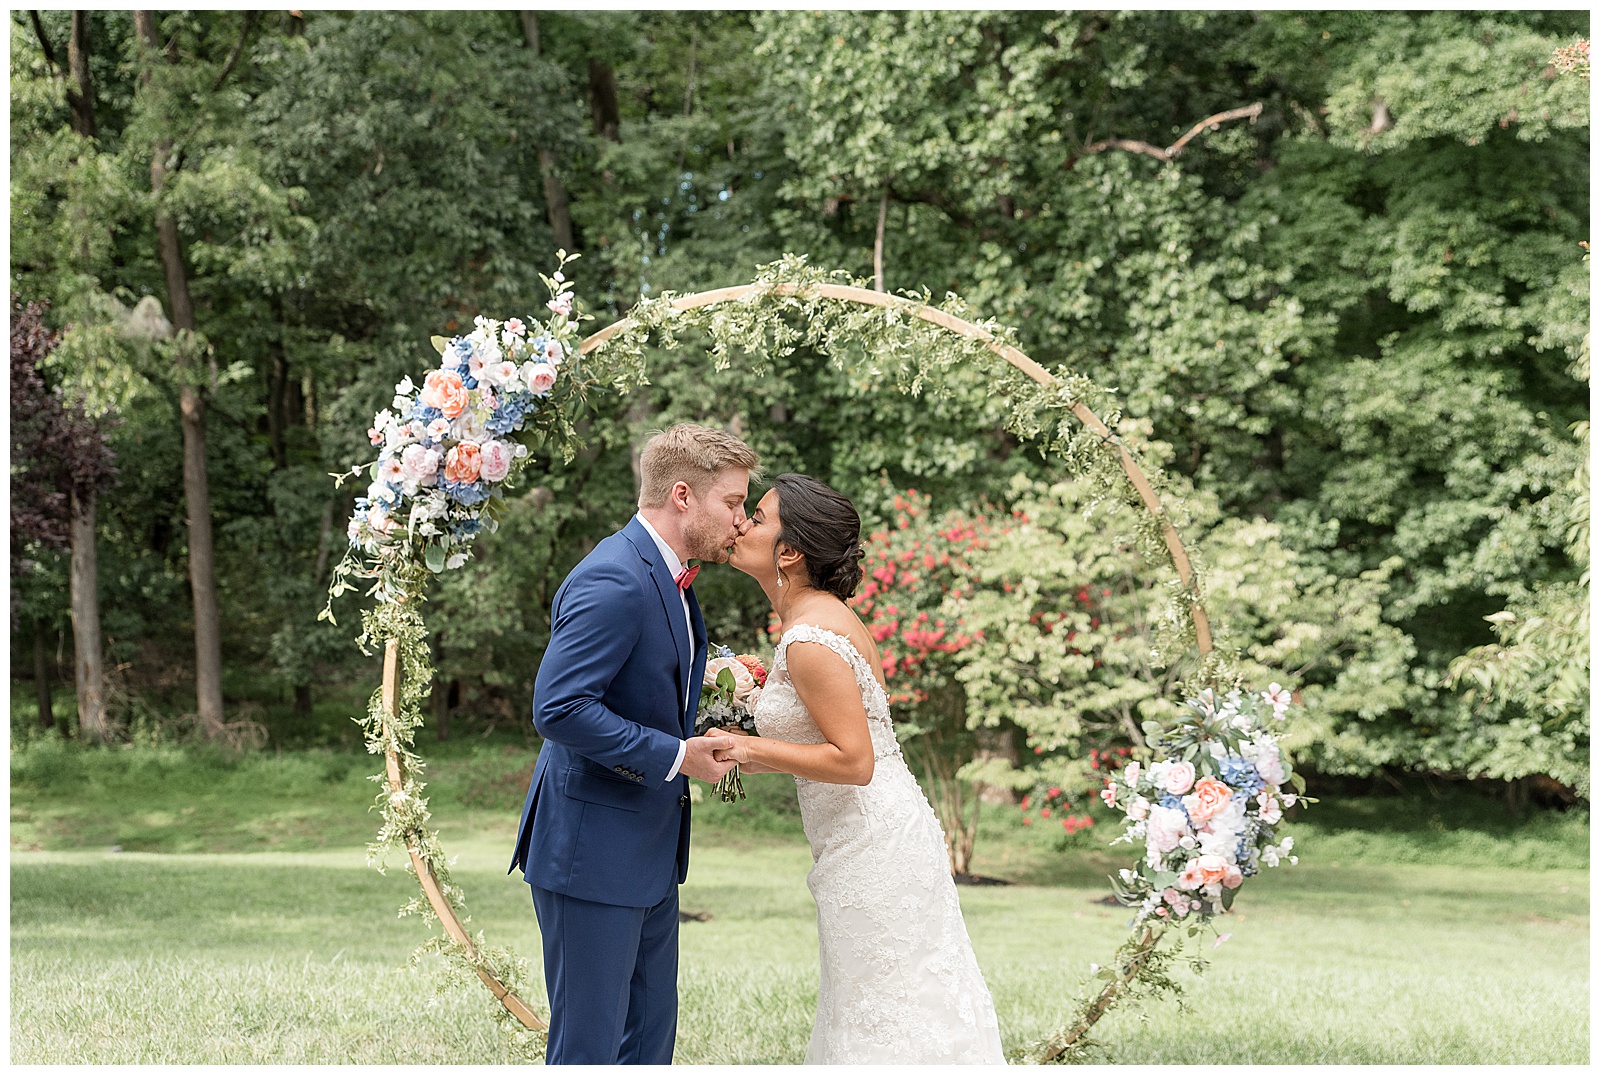 bride and groom share their first kiss by modern floral archway in ellicott city maryland at outdoor venue